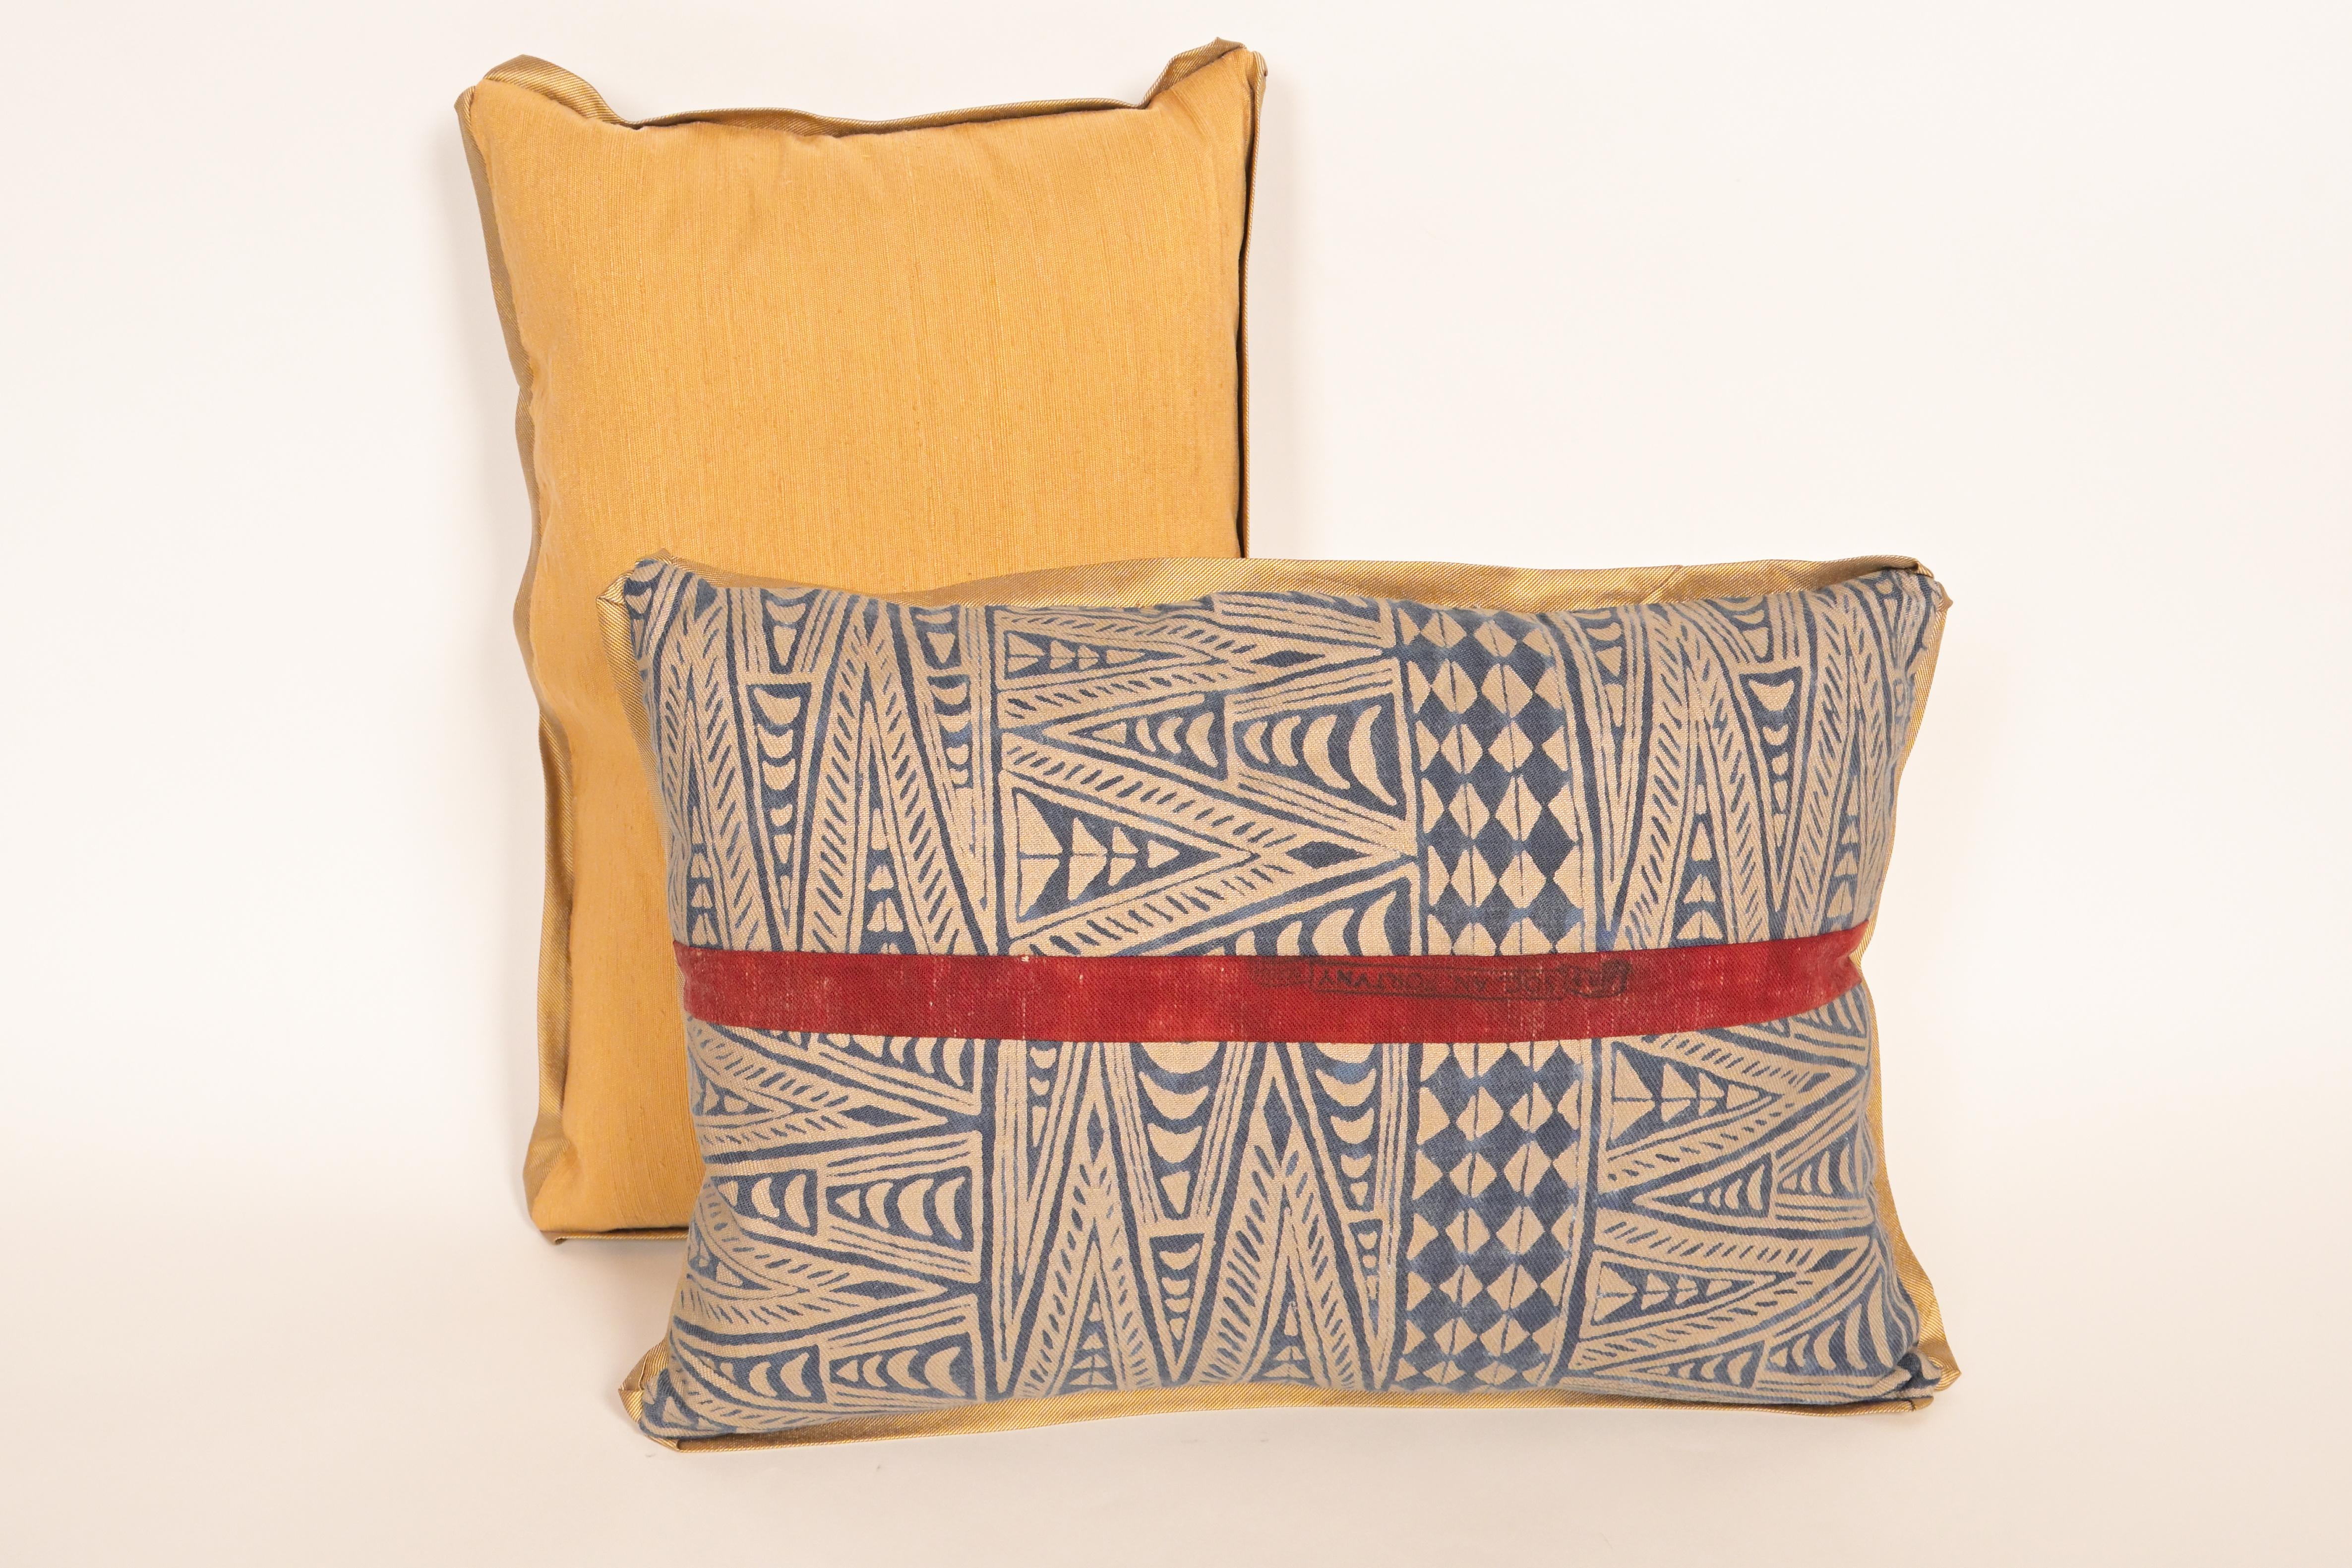 American Pair of Fortuny Lumbar Cushions with Rare Melilla Pattern by David Duncan For Sale